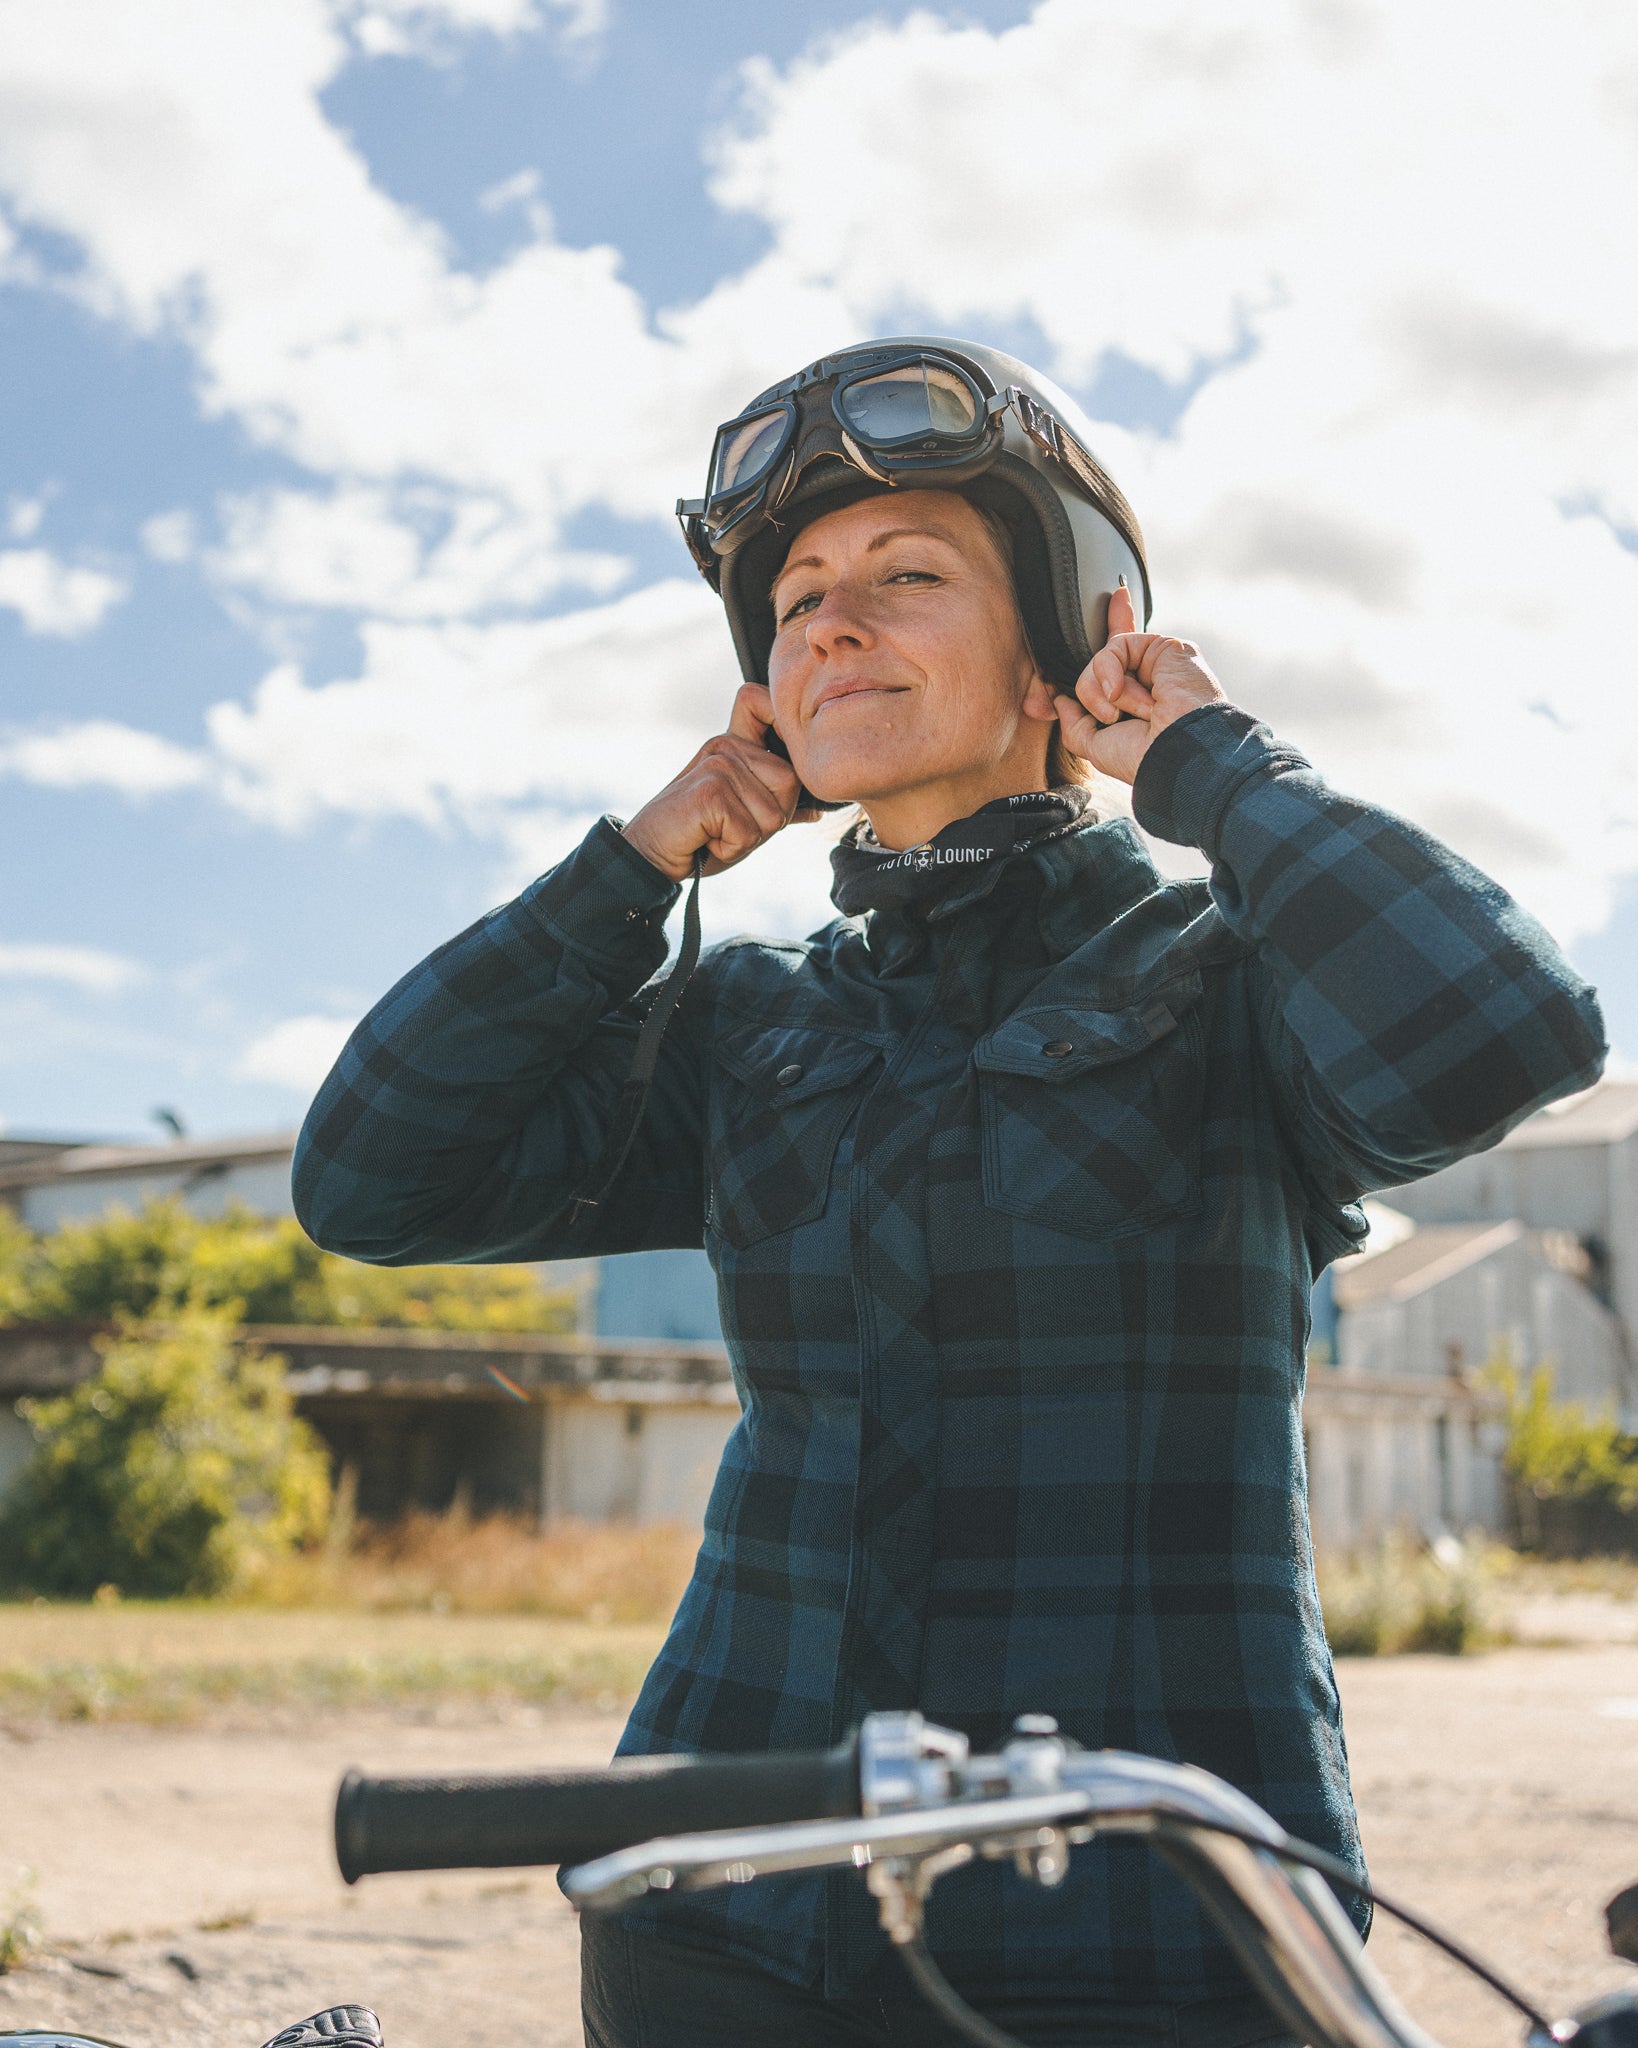 A woman putting on her motorcycle helmet